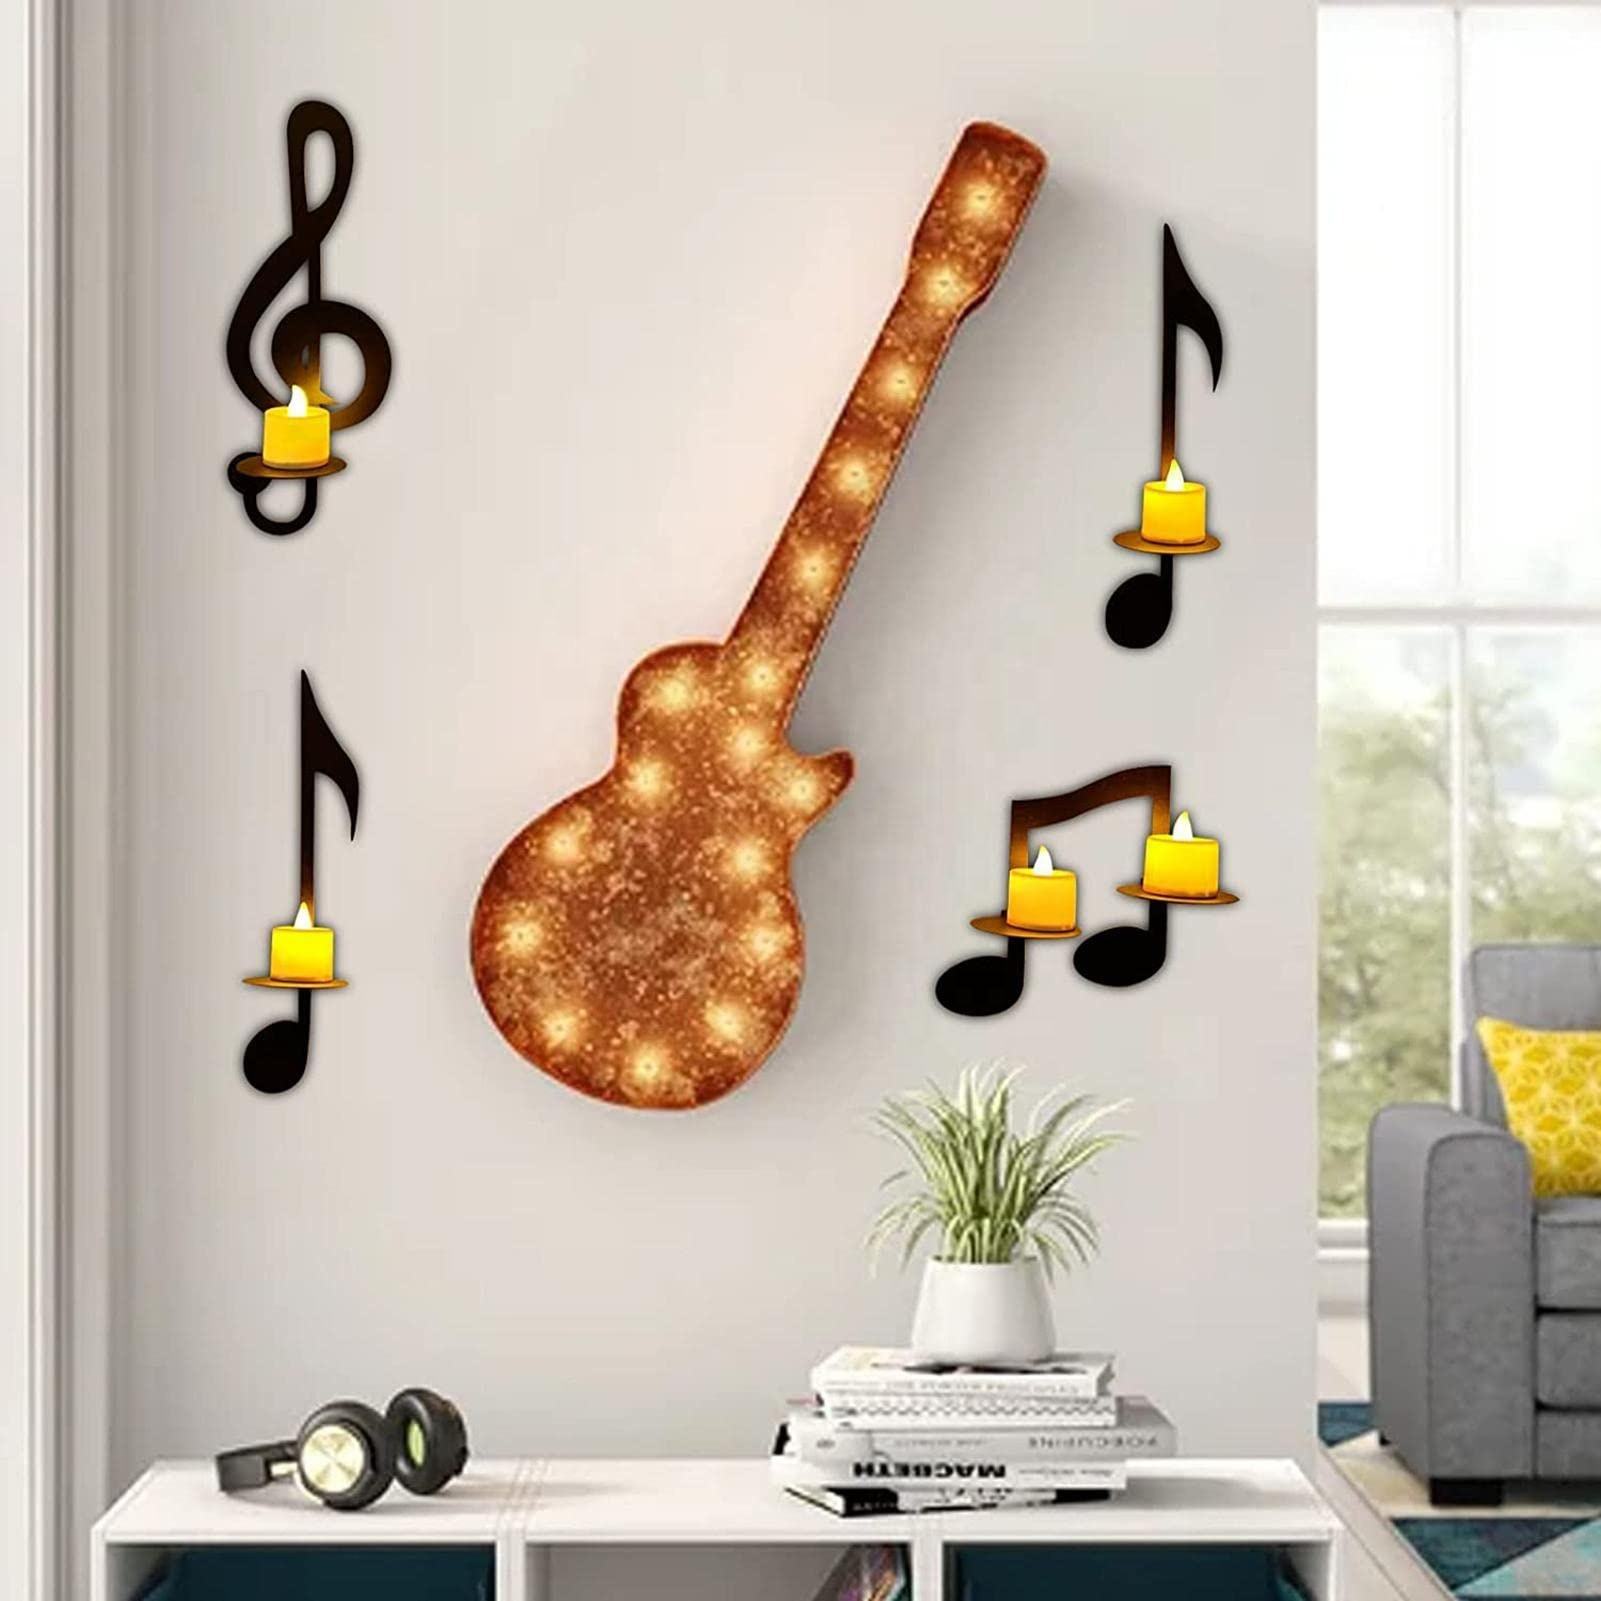 4 Pcs Black Music Note Wall Sconce Metal Candle Holder For Home Office Classroom Musical Symbol Gift Decor